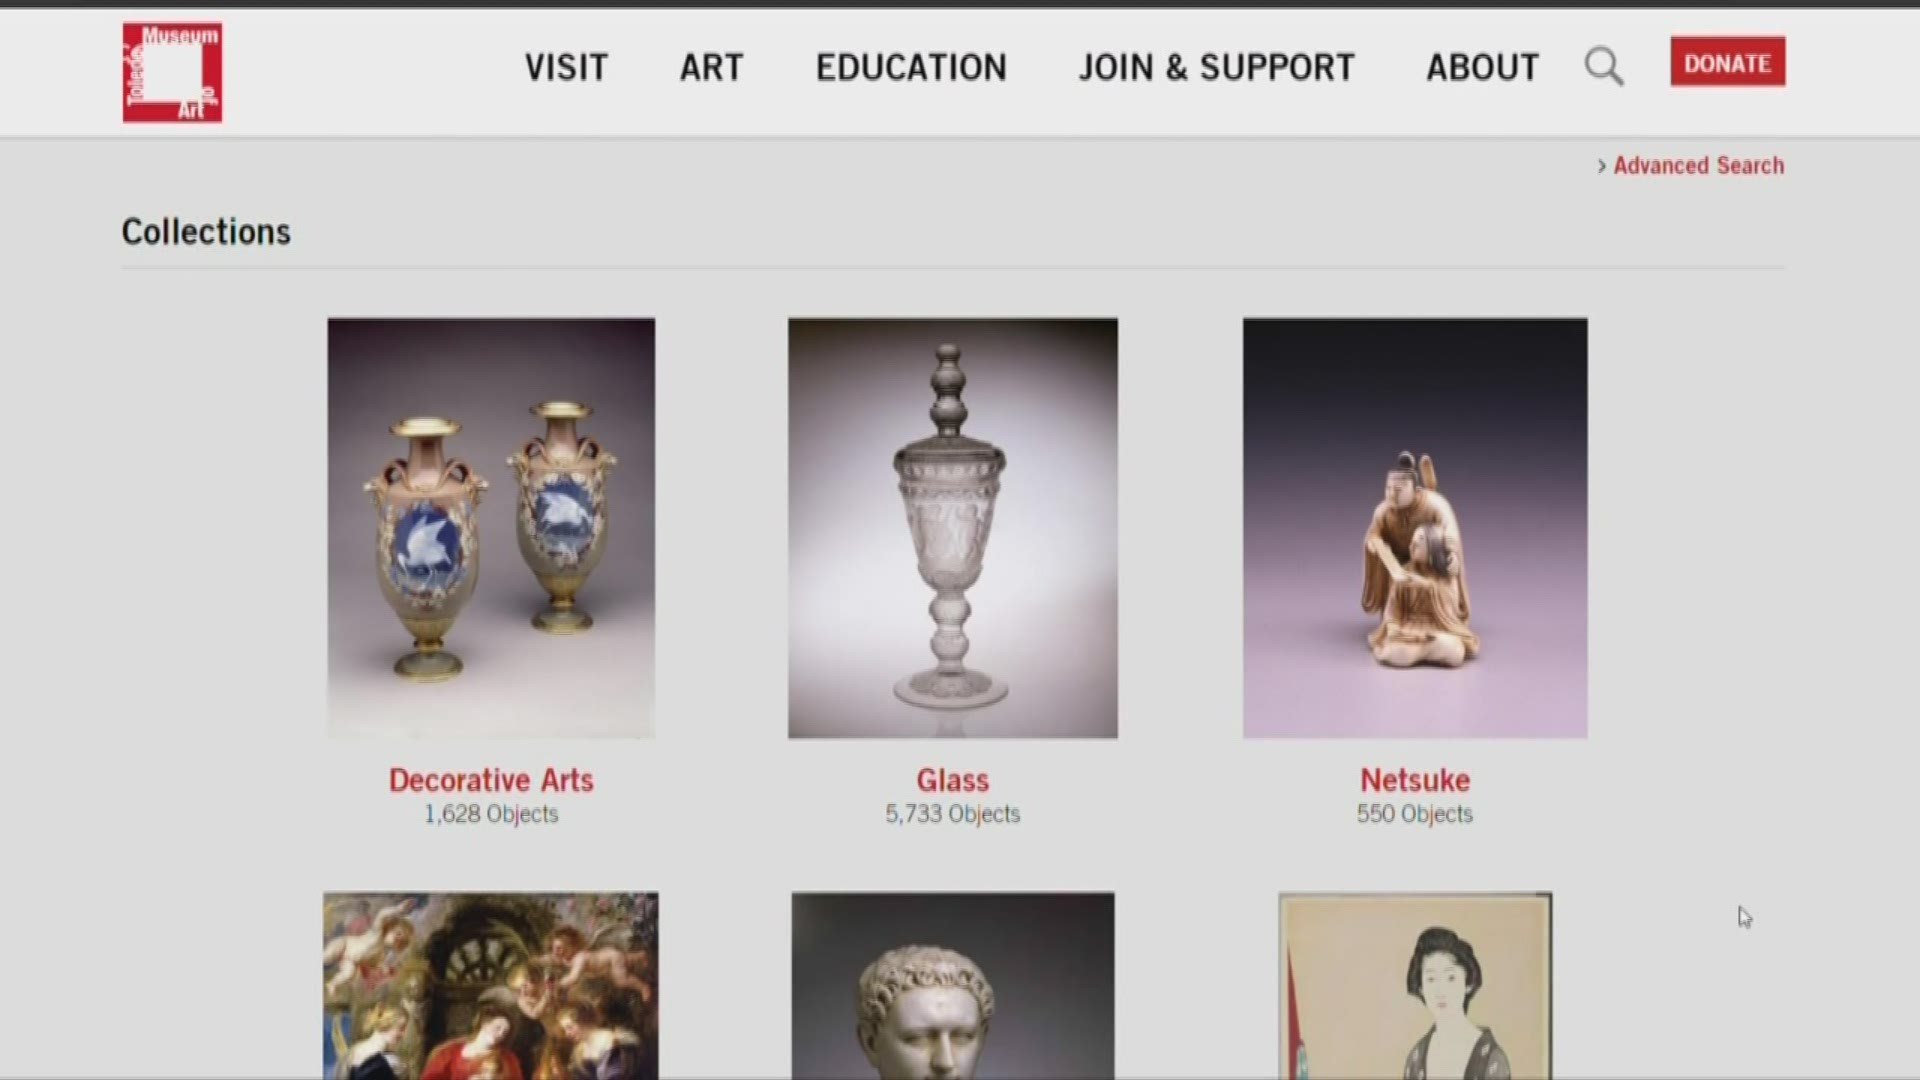 Most of the artwork on display is also viewable on the museum's website.